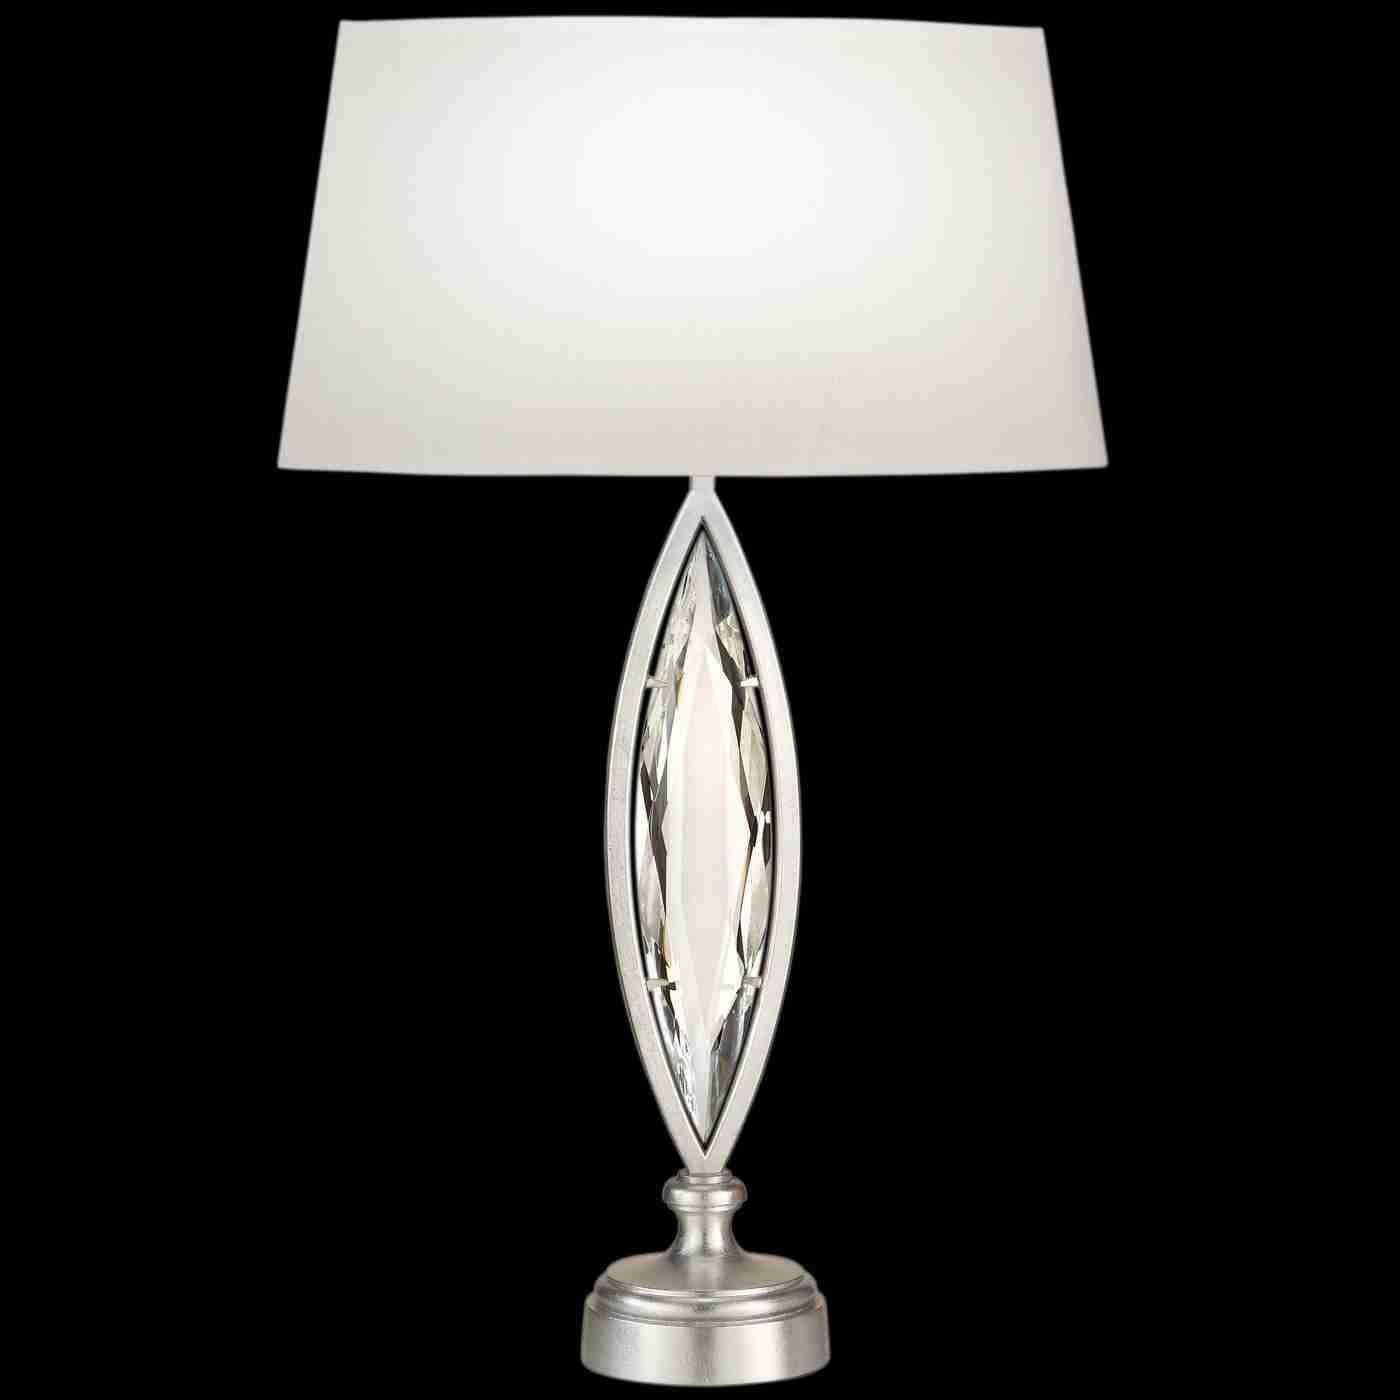 Fine Art Handcrafted Lighting - Marquise Table Lamp - Lights Canada